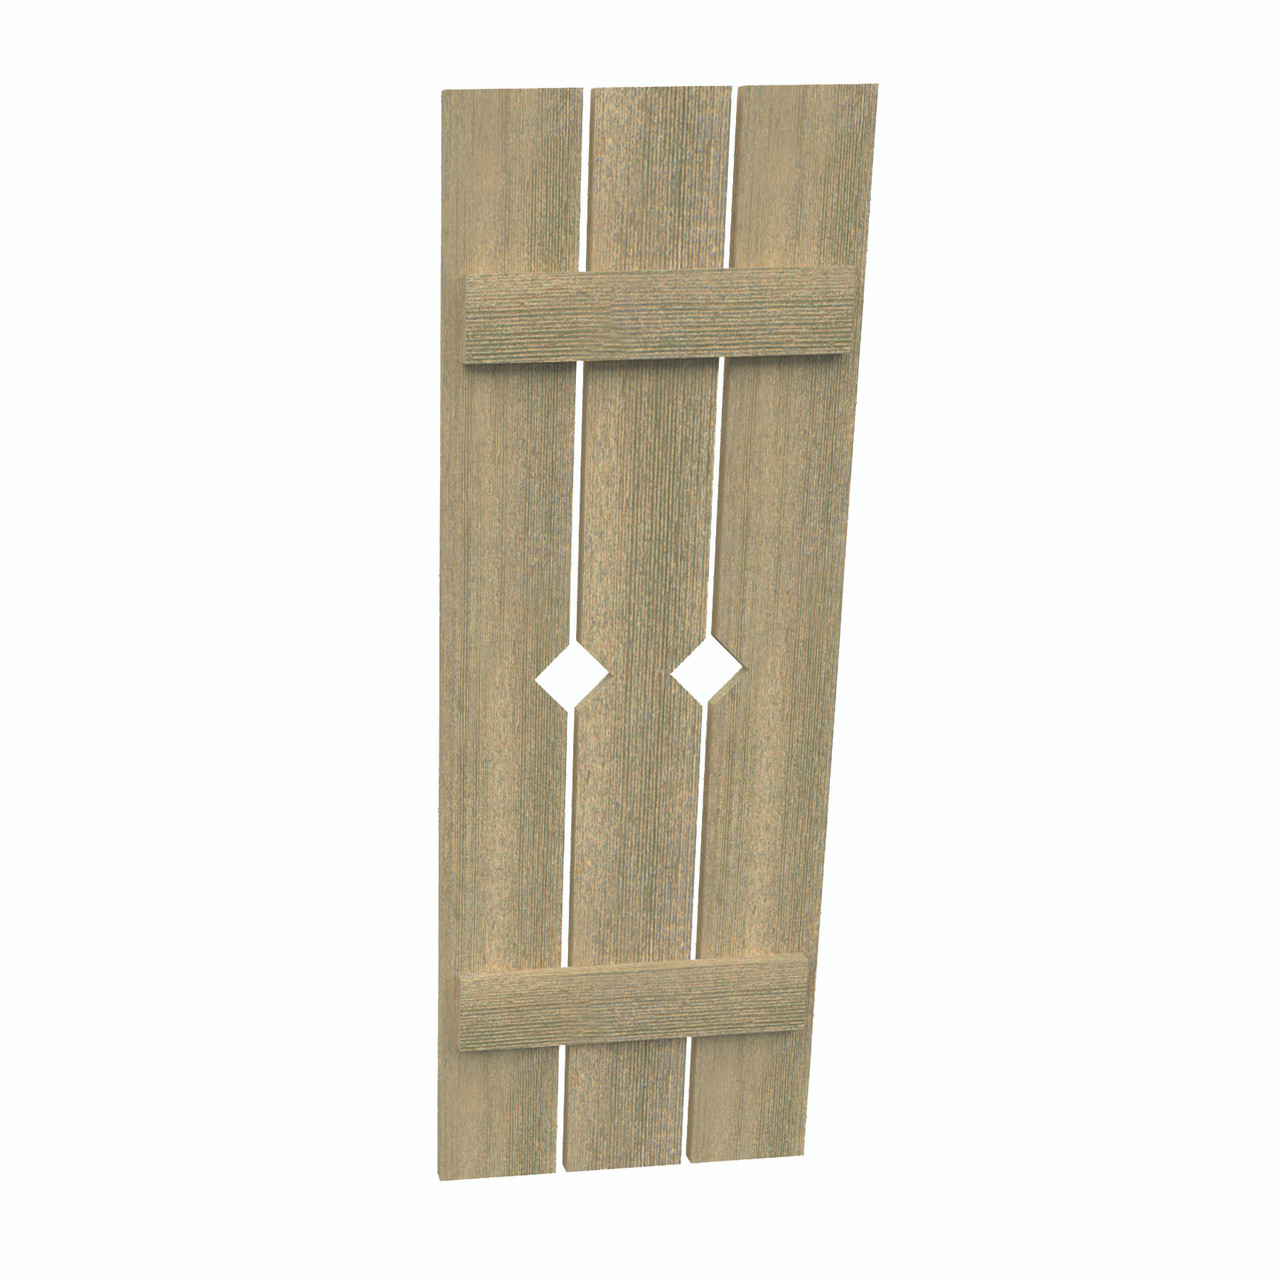 18 inch by 42 inch Plank Shutter with 3-Plank, Diamond